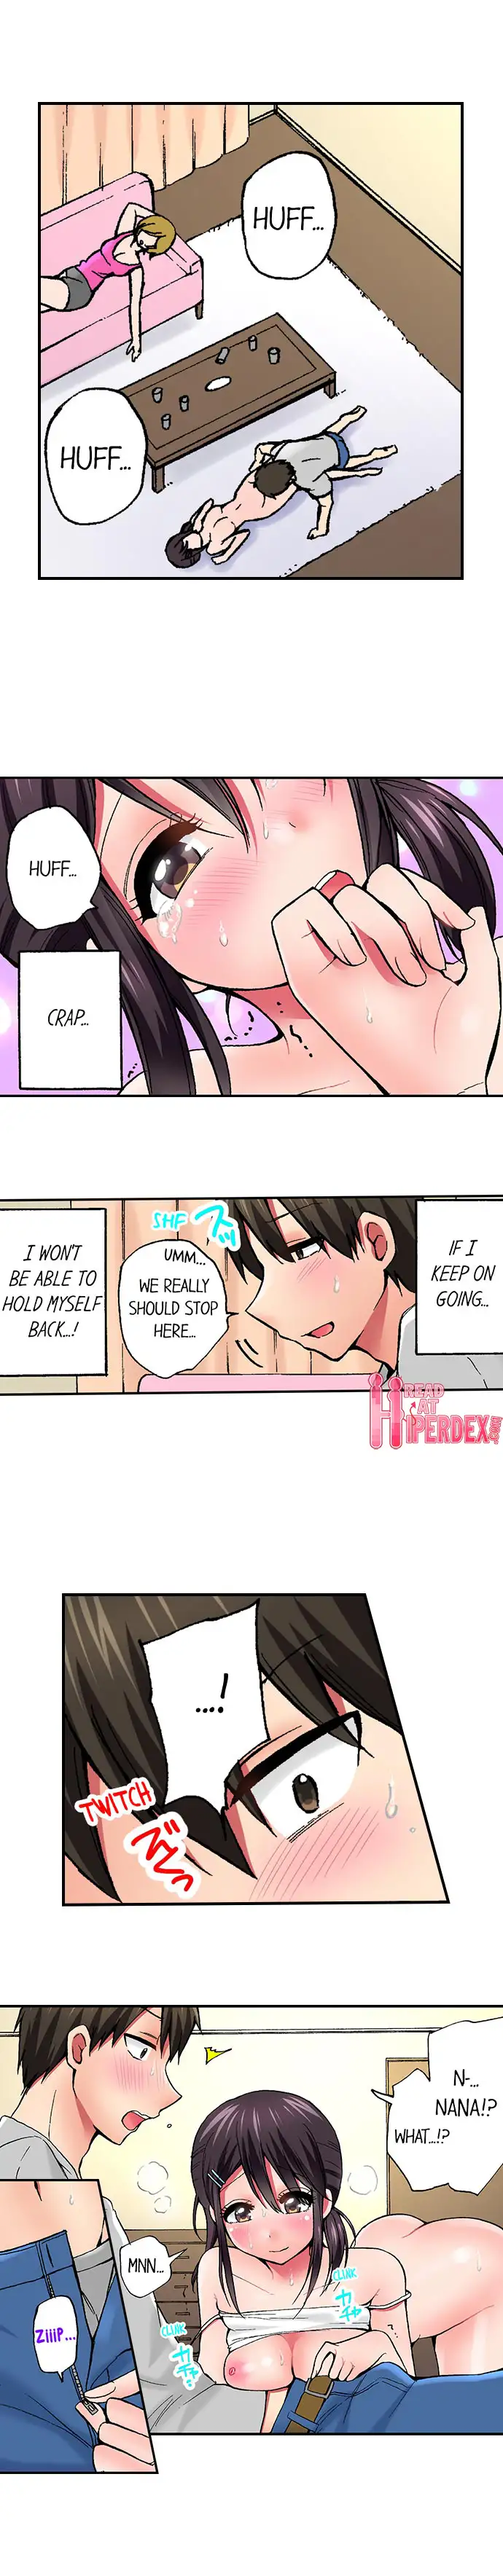 Pranking the Working Nurse - Chapter 12 Page 5